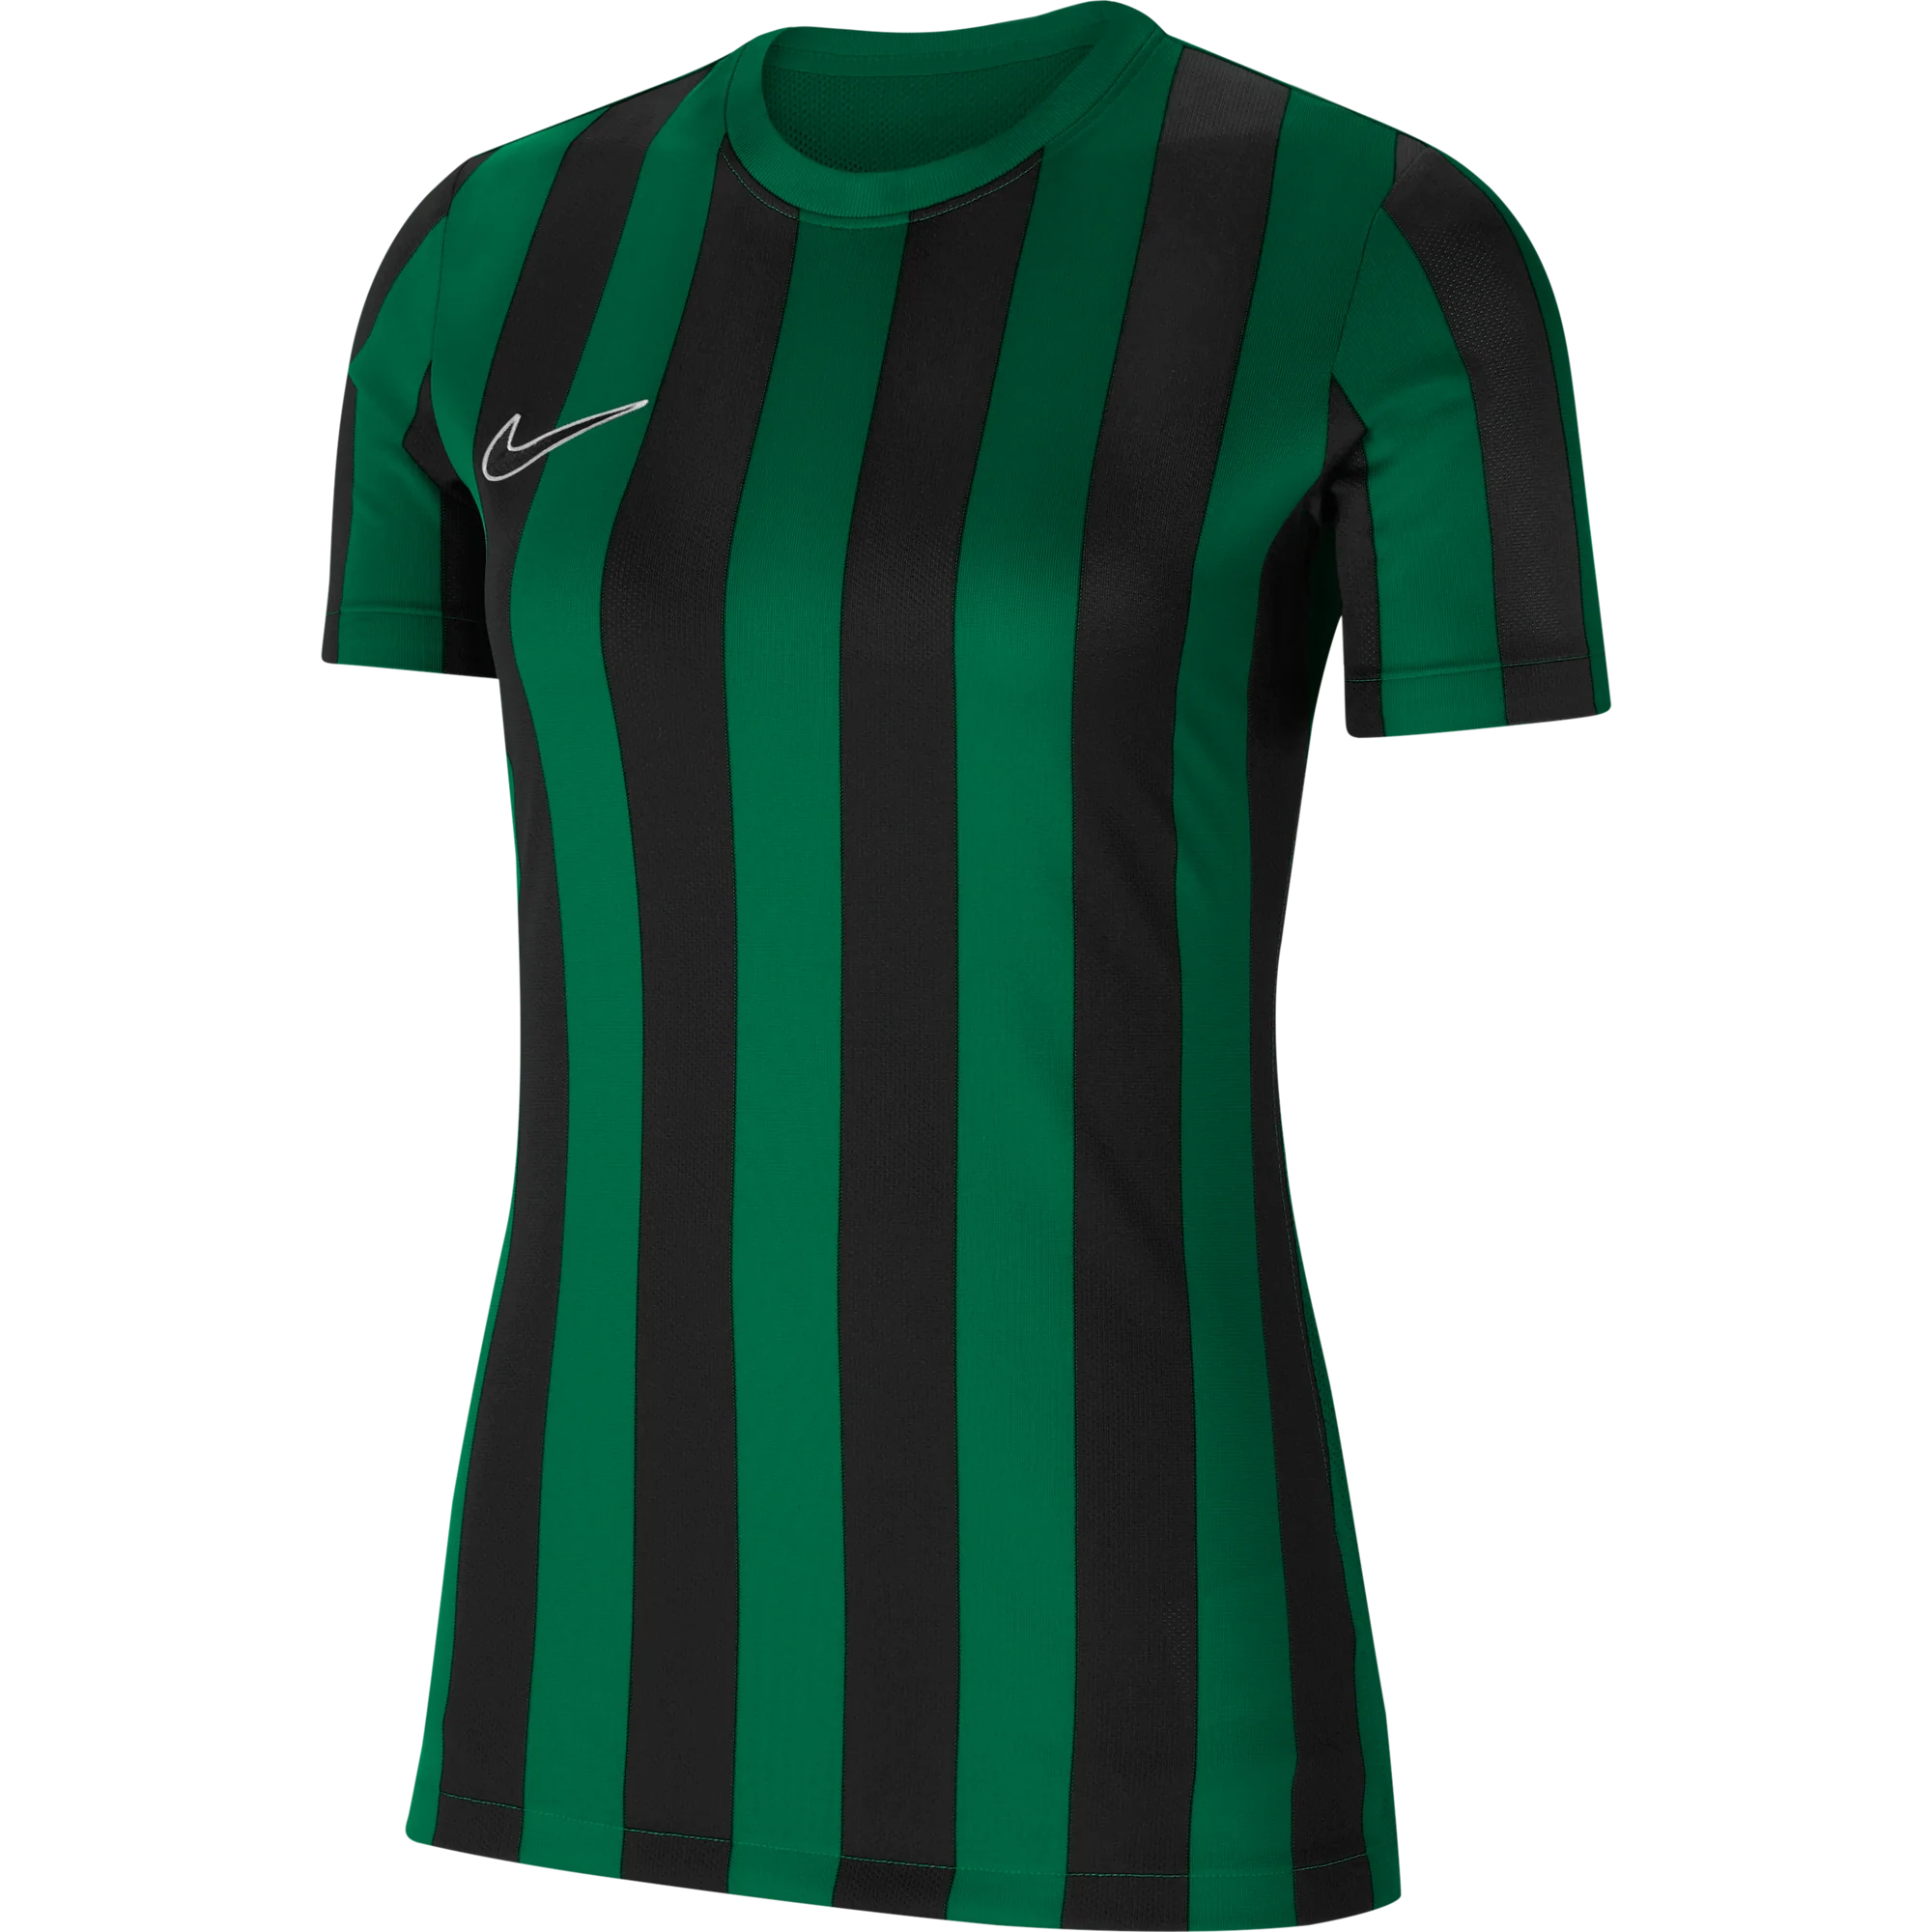 Women's Striped Division IV Jersey S/S 2021